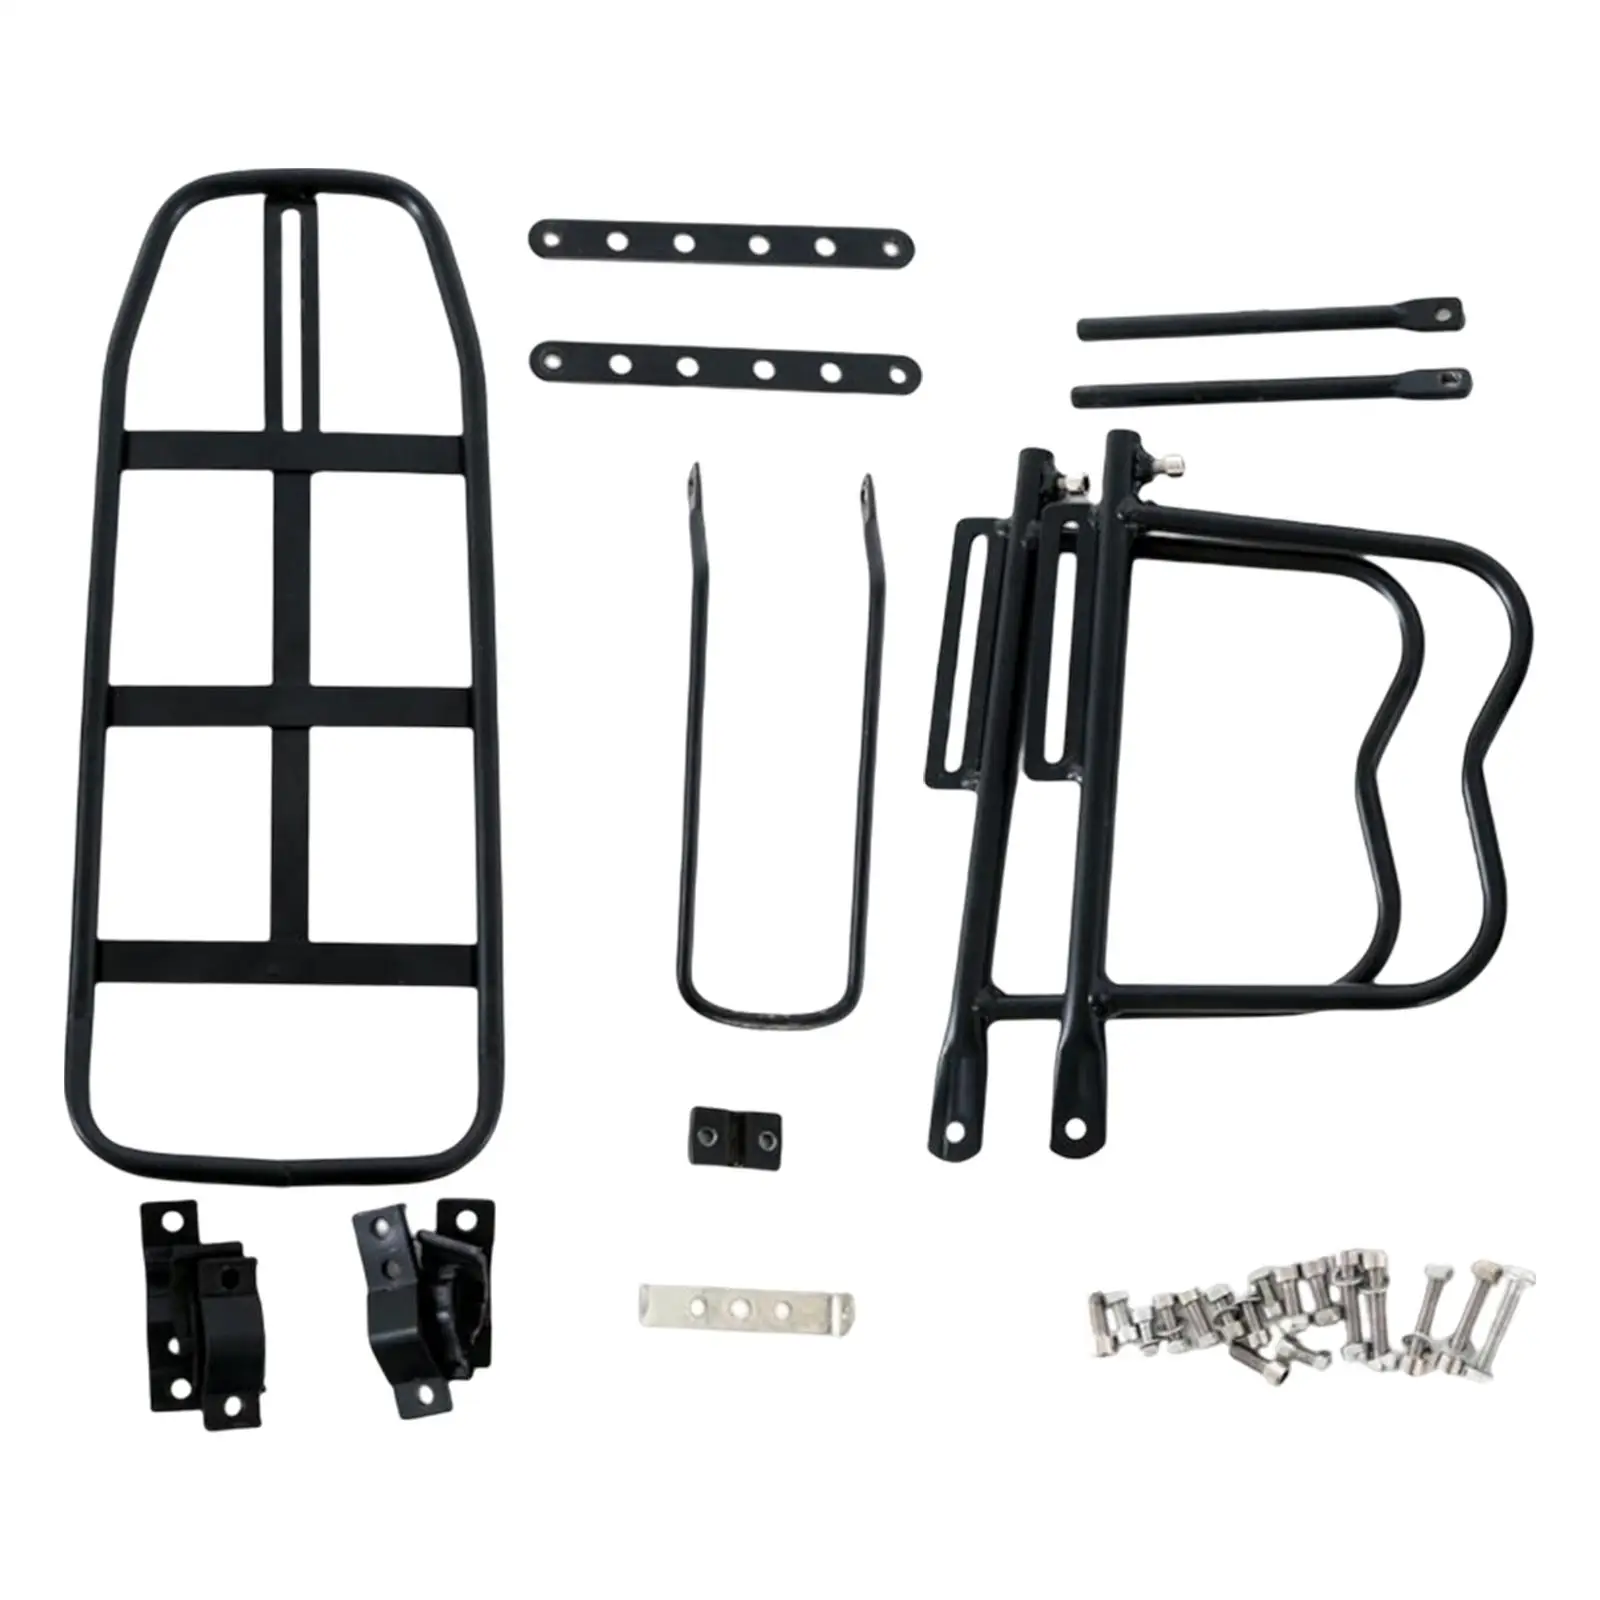 Mountain Bike Bike Rear Luggage Cargo Rack Easy Installation Accessories Back Seat Carrier Panniers Universal Shelf for